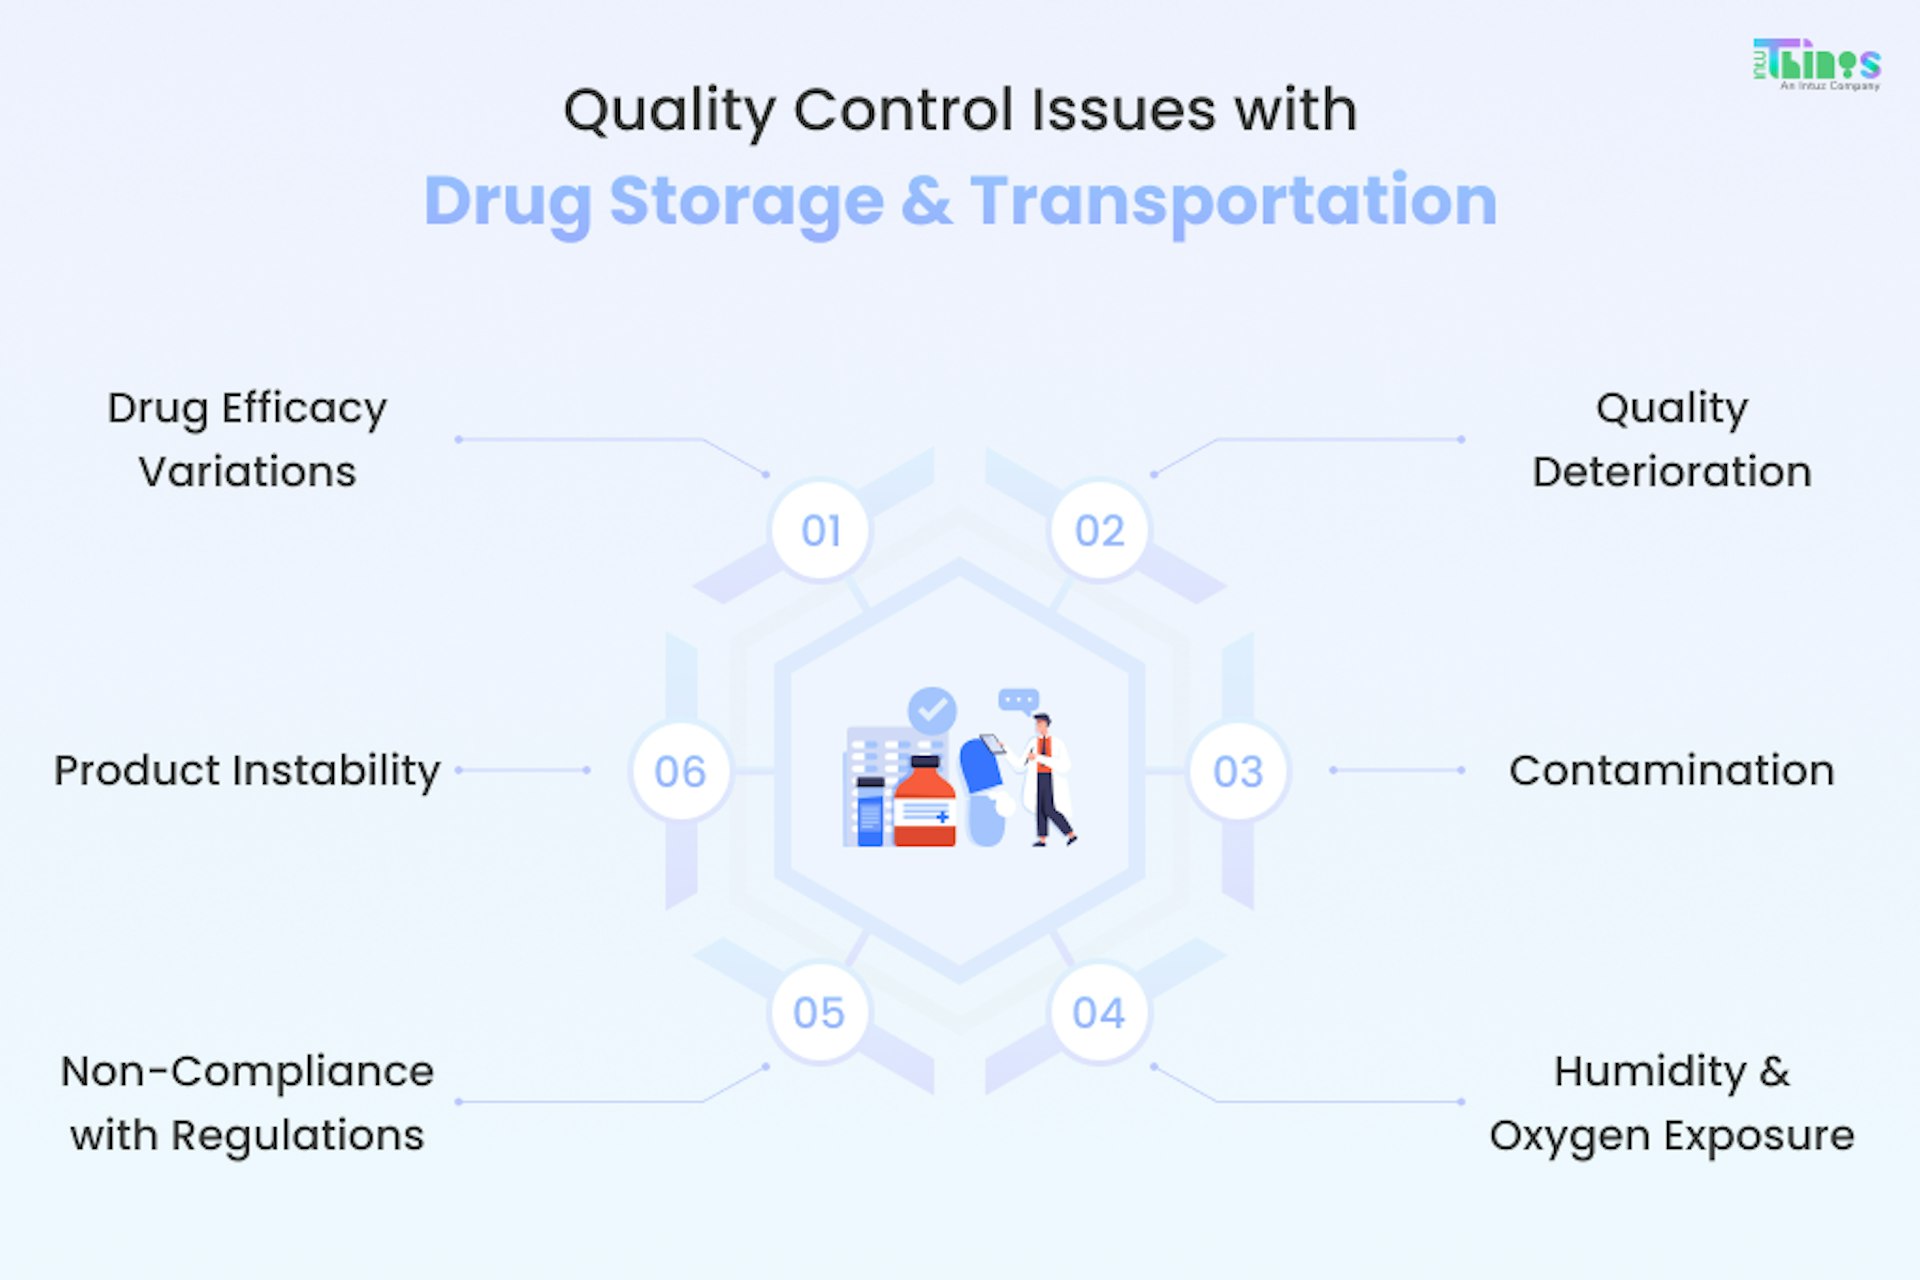 Quality Control Issues with Drug Storage & Transportation